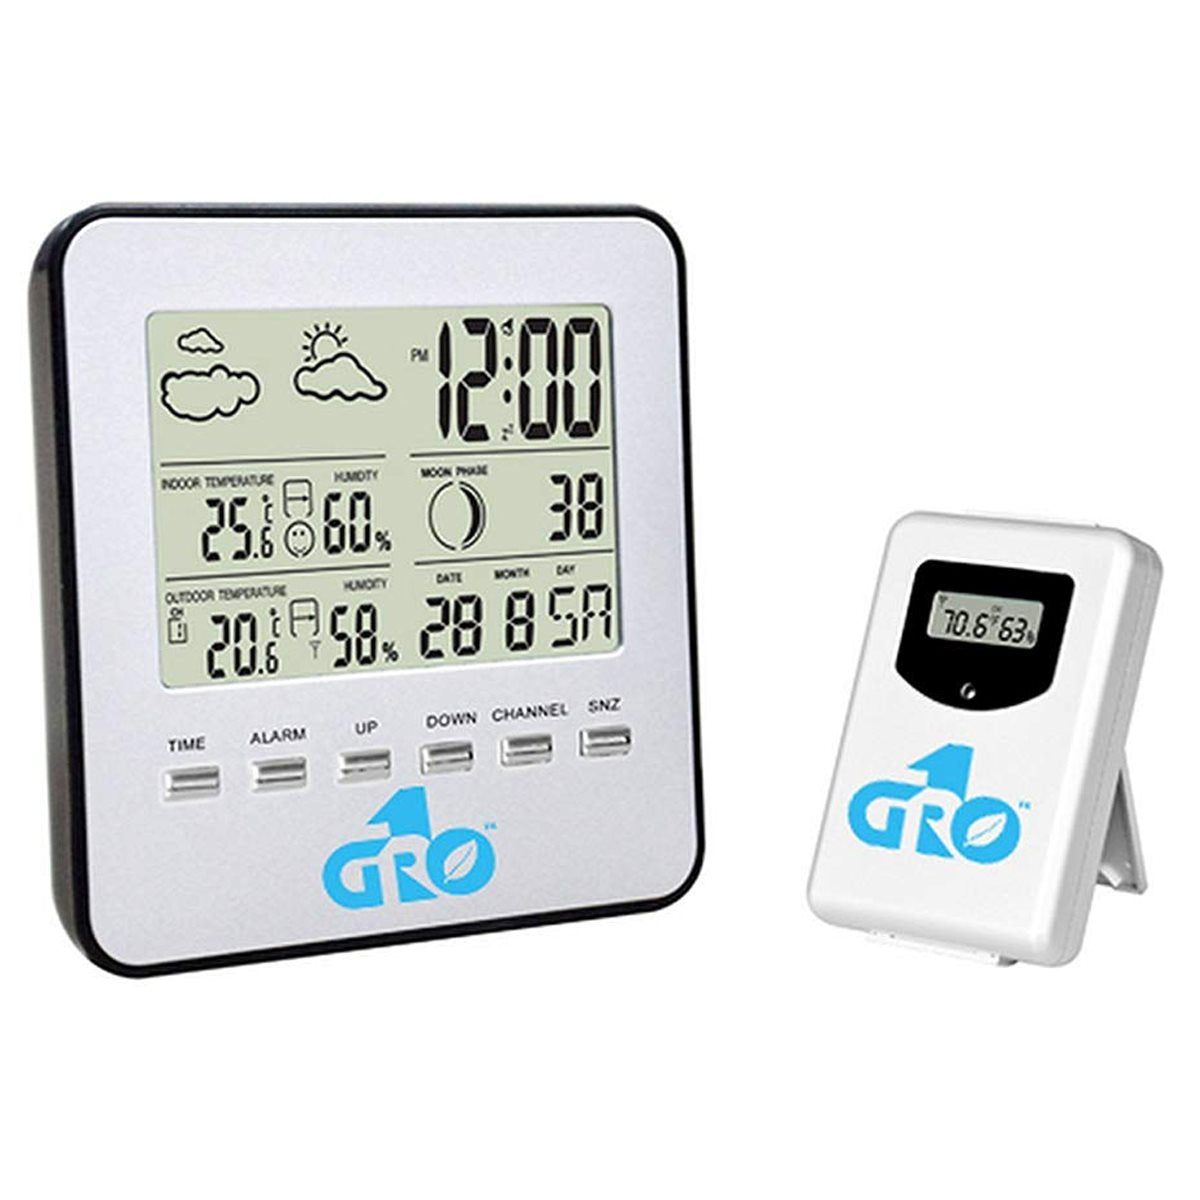 Gro1 Wireless Weather Station and Sensor